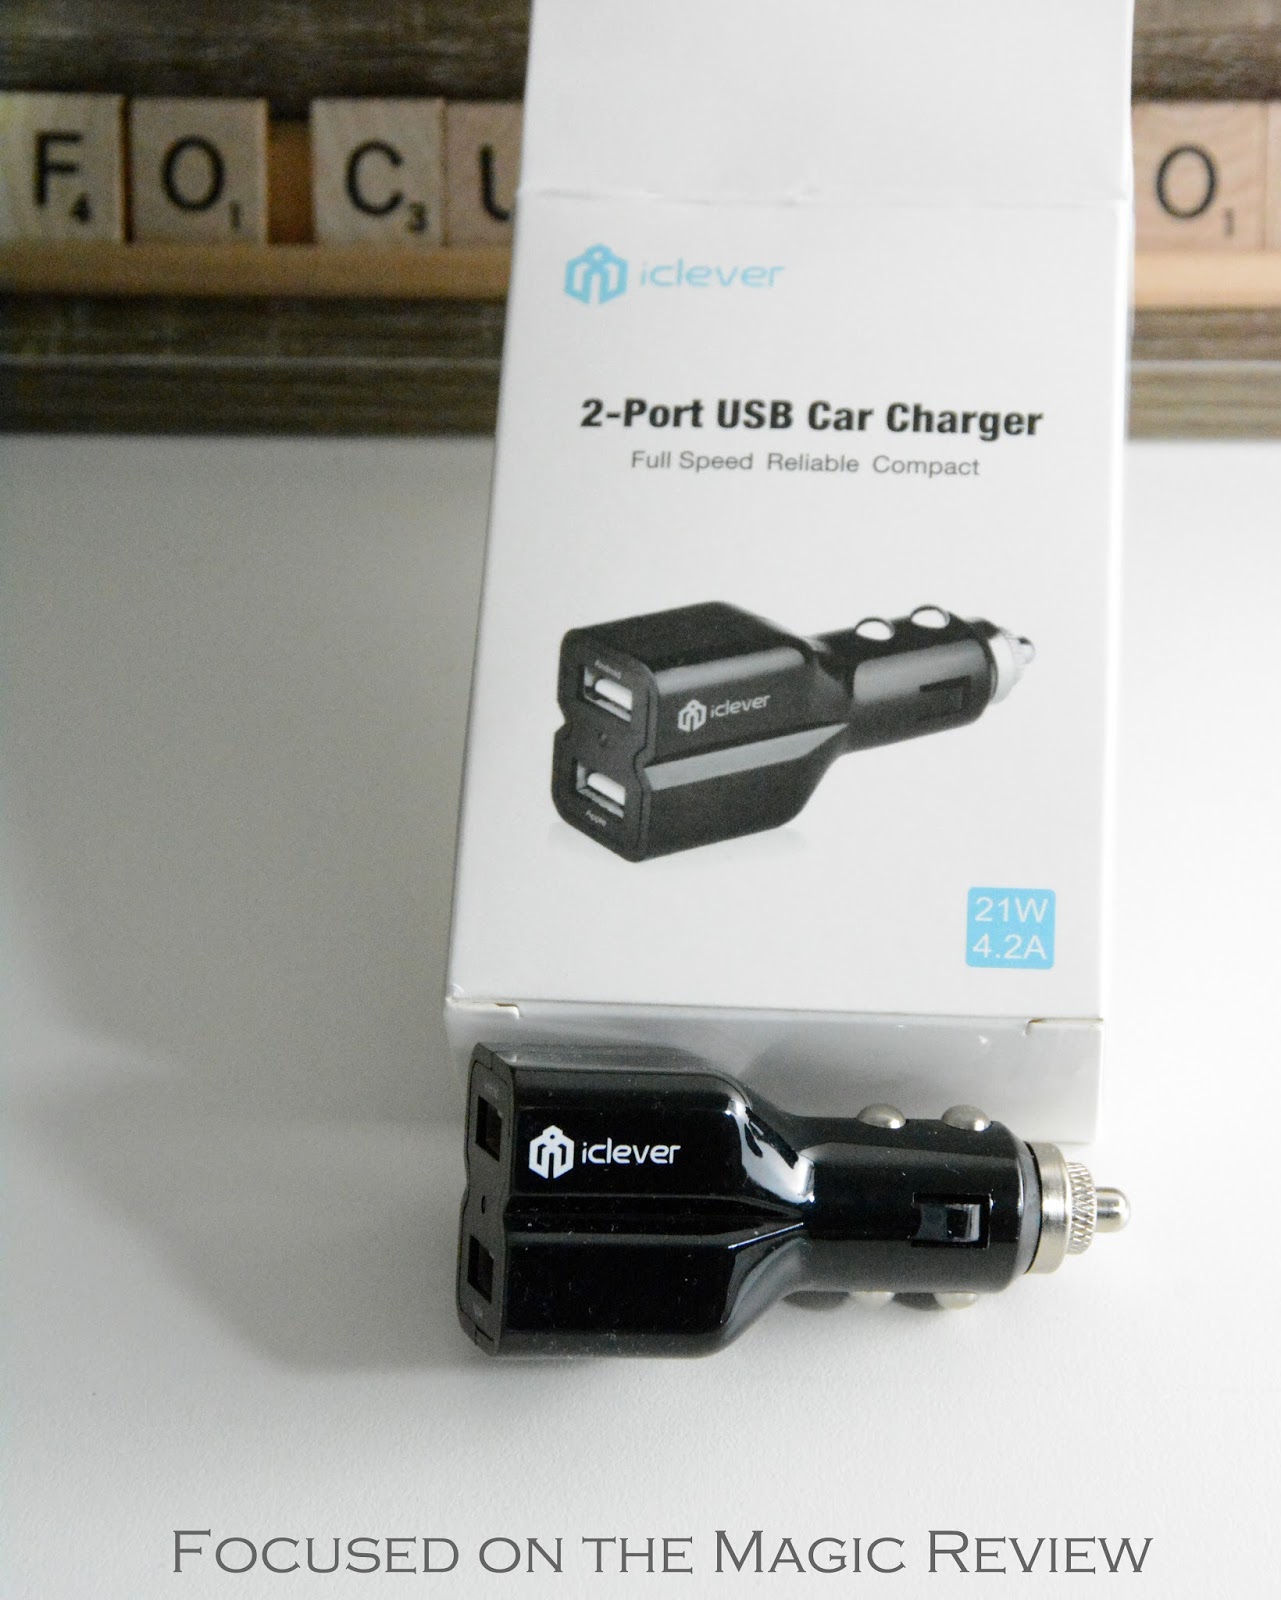 iClever 18W/3.6A max Dual Port USB Car Charger | Focused on the Magic Review